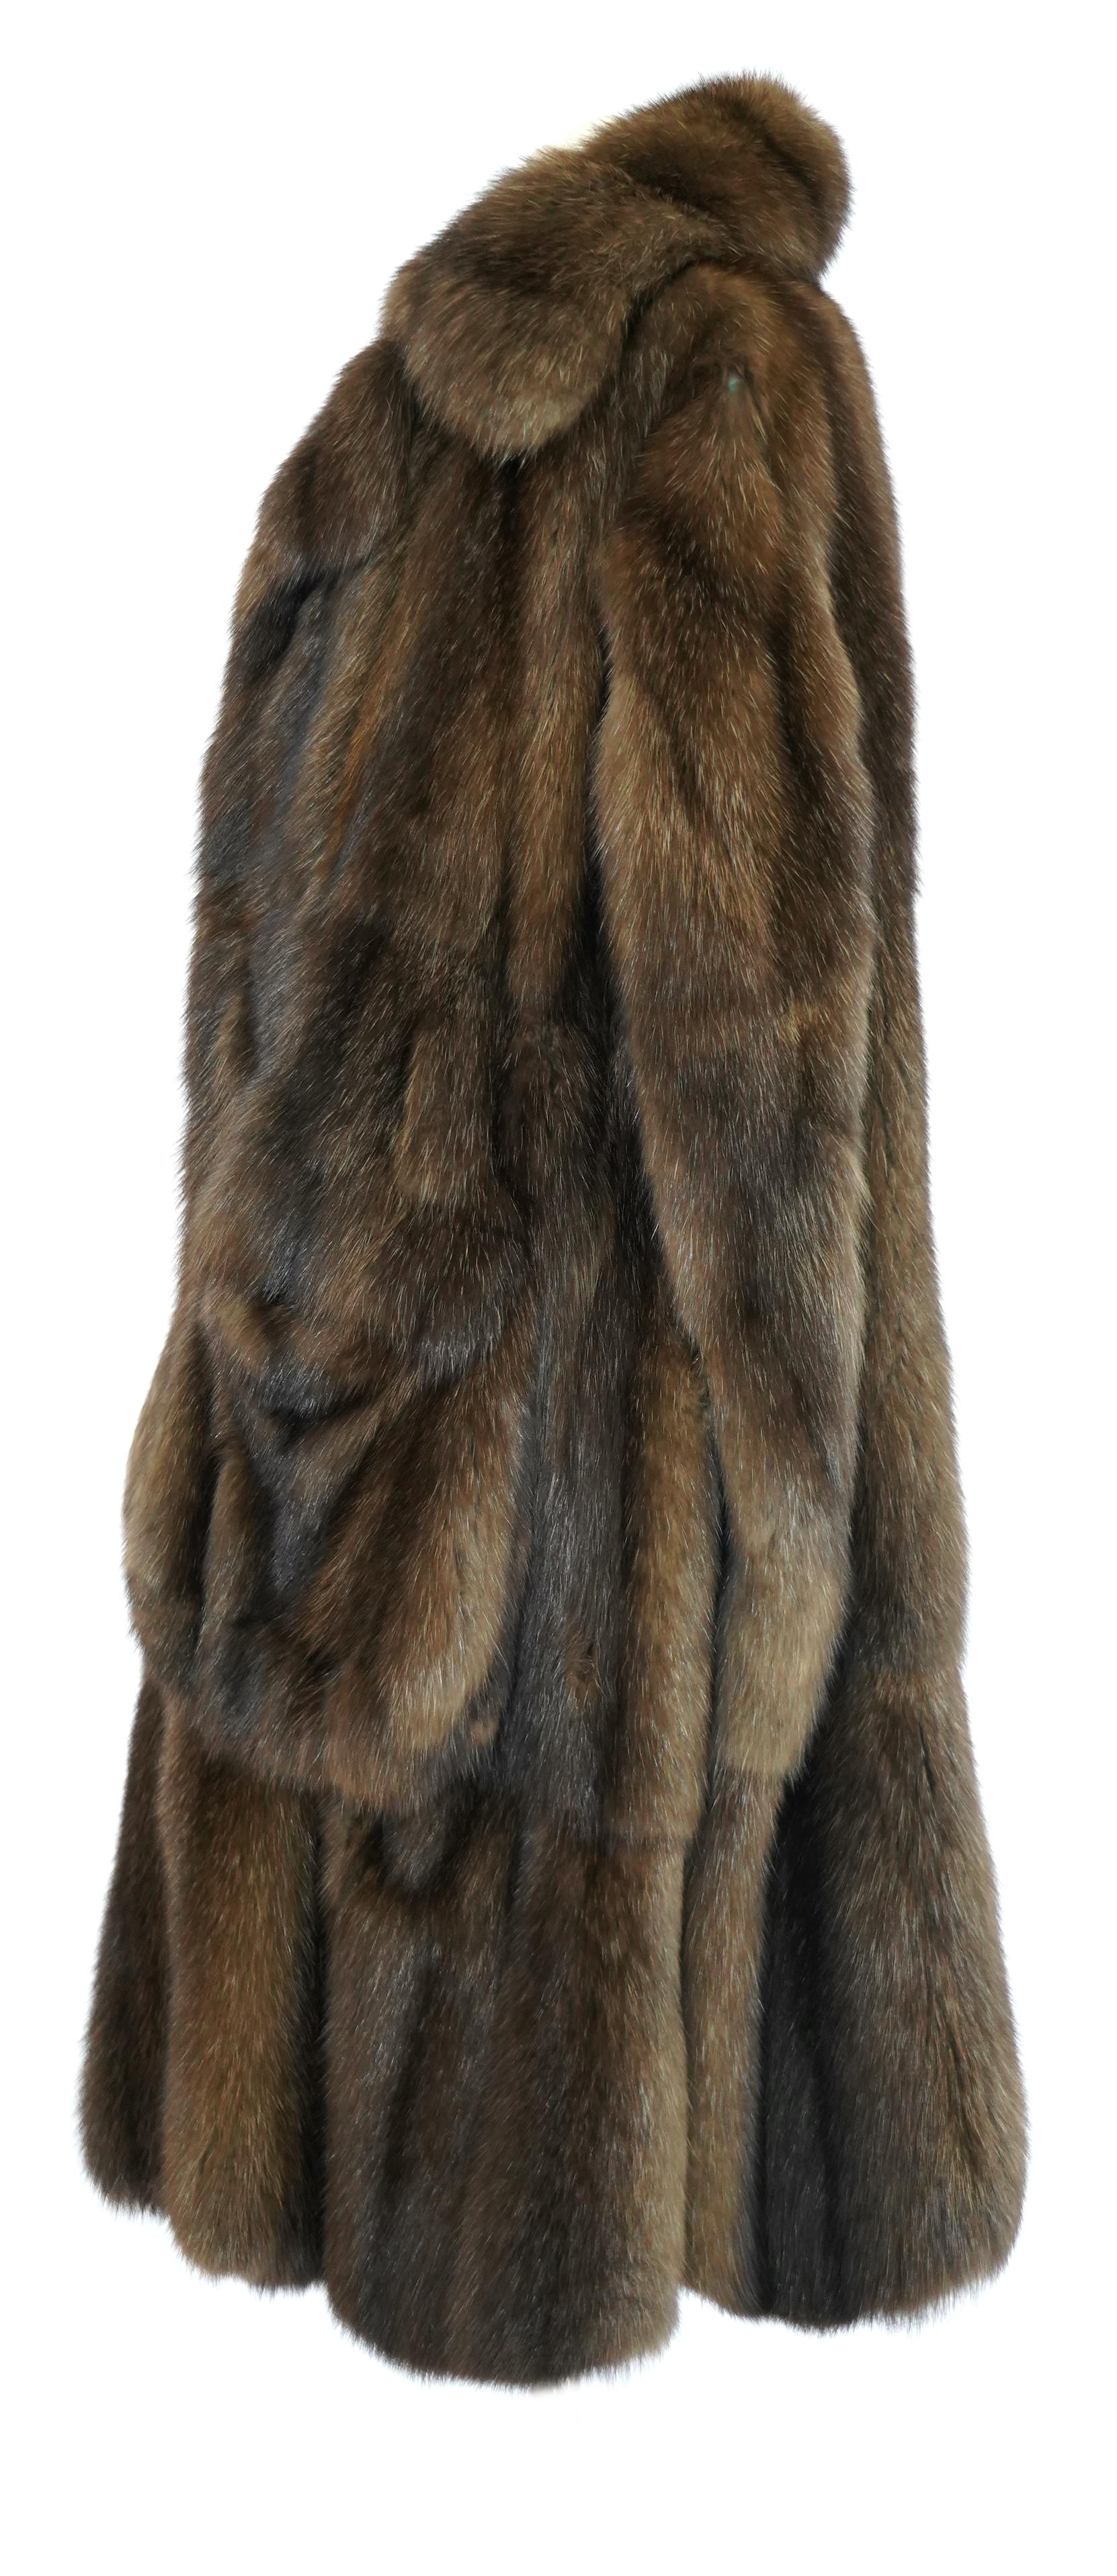 Absolutely stunning Barguzin sable (Silvery 5 - highest grade) cape/vest. Big notched collar. Deep double fur pockets. Helen Yarmak exclusive fully detachable 100% silk lining.